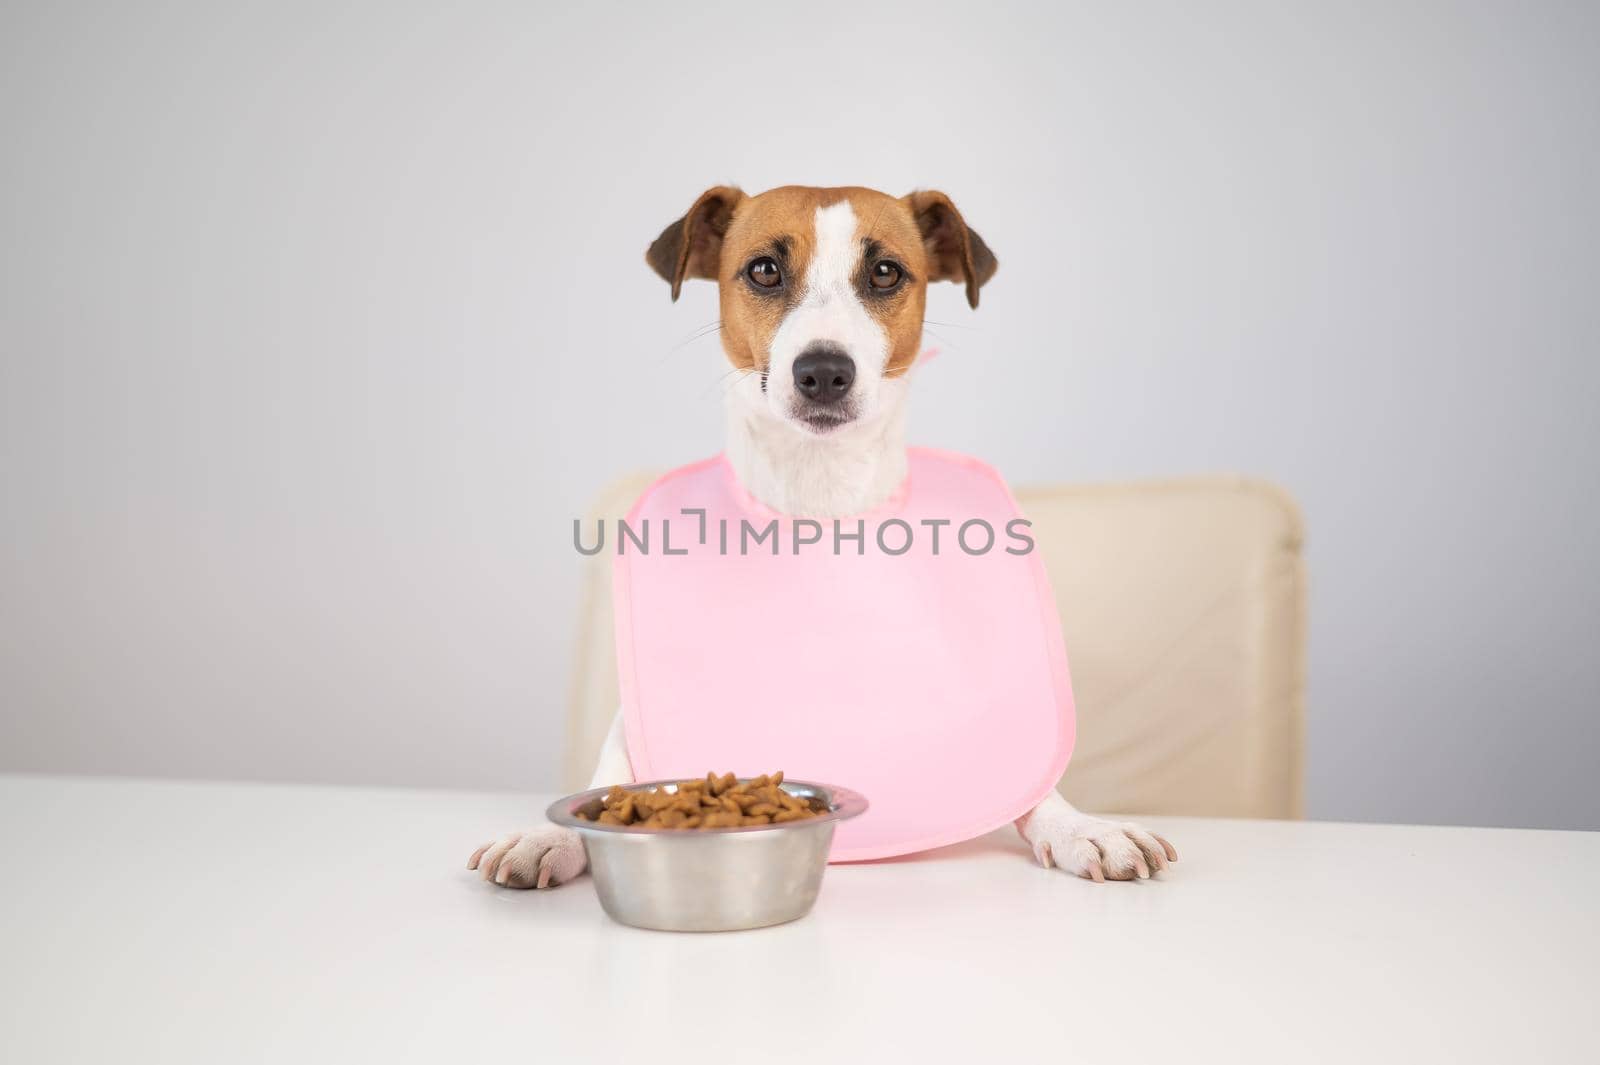 Dog jack russell terrier at the dinner table in a pink bib